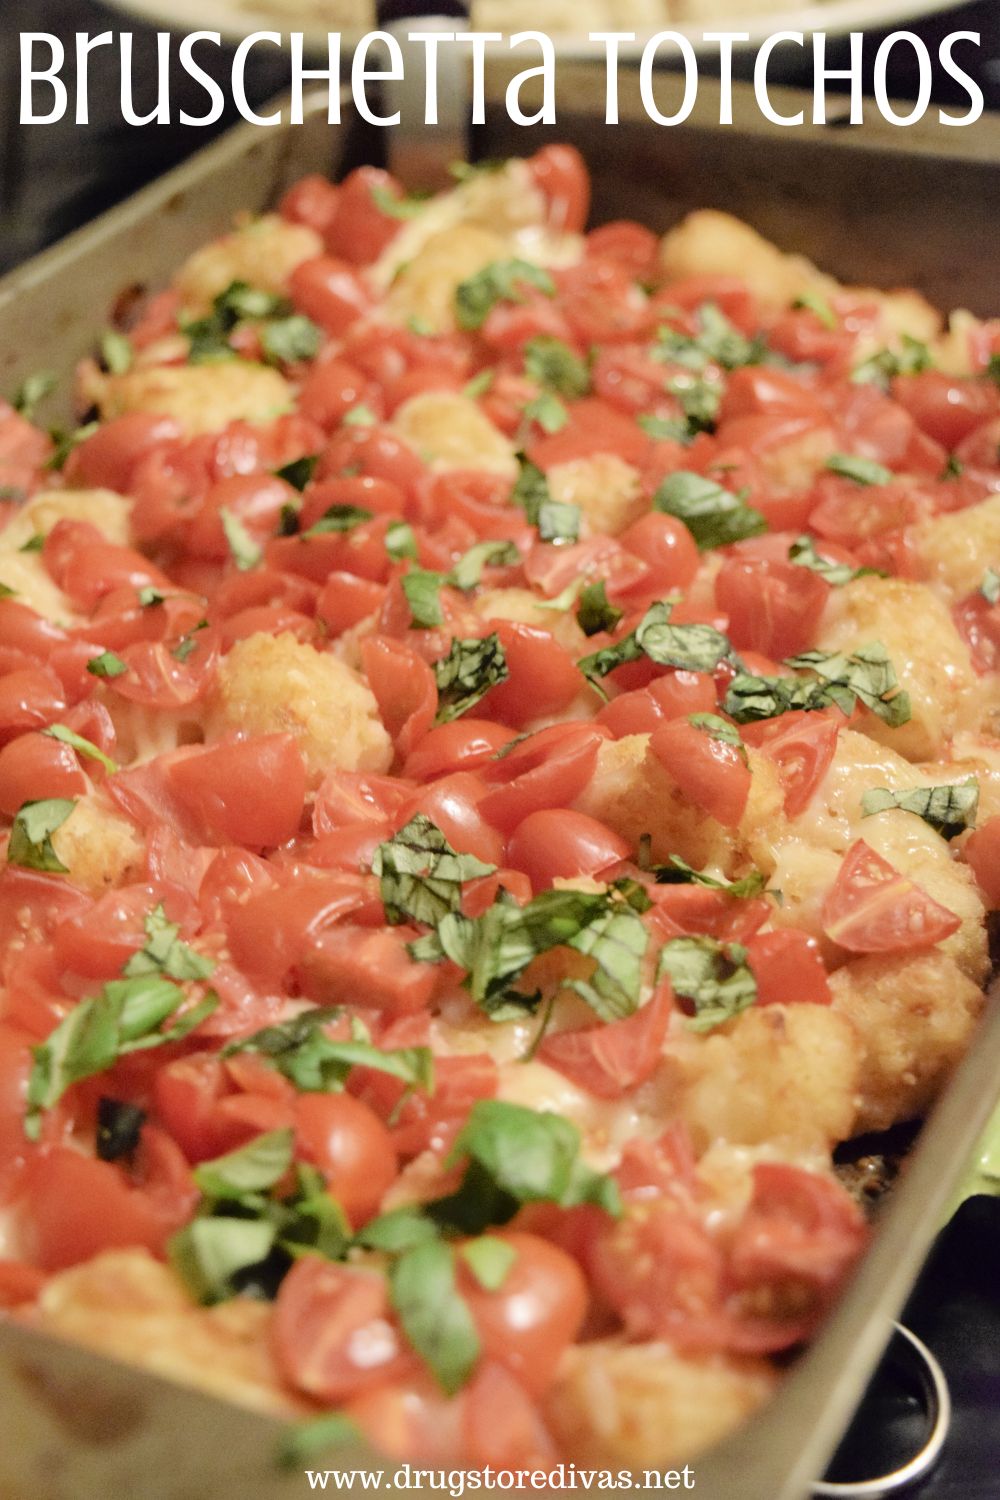 Tater tots with cheese, tomatoes, and basil in a pan with the words 